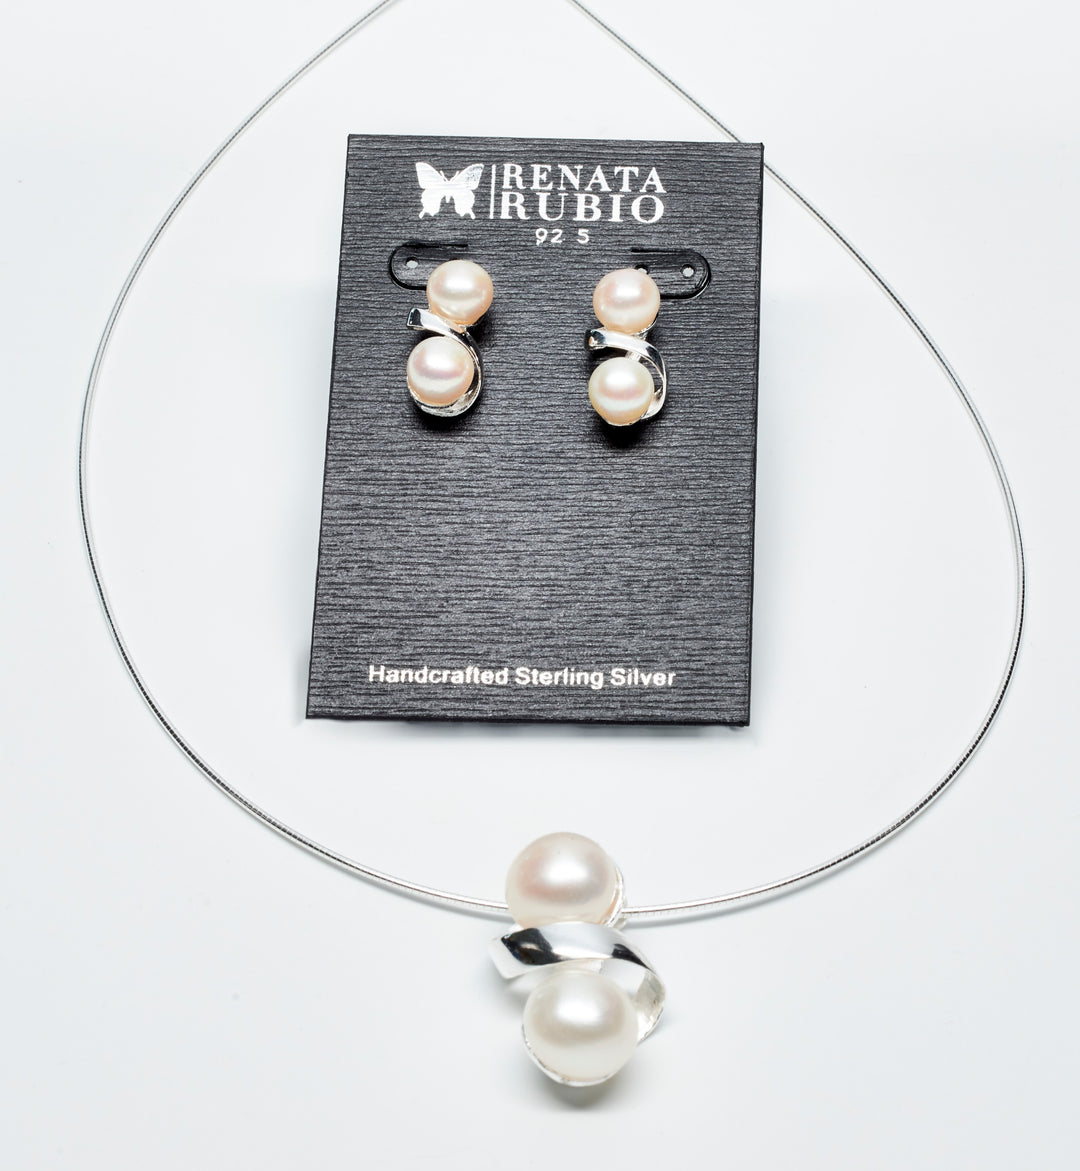 Swirled Silver Double Pearl Earrings and Pendant